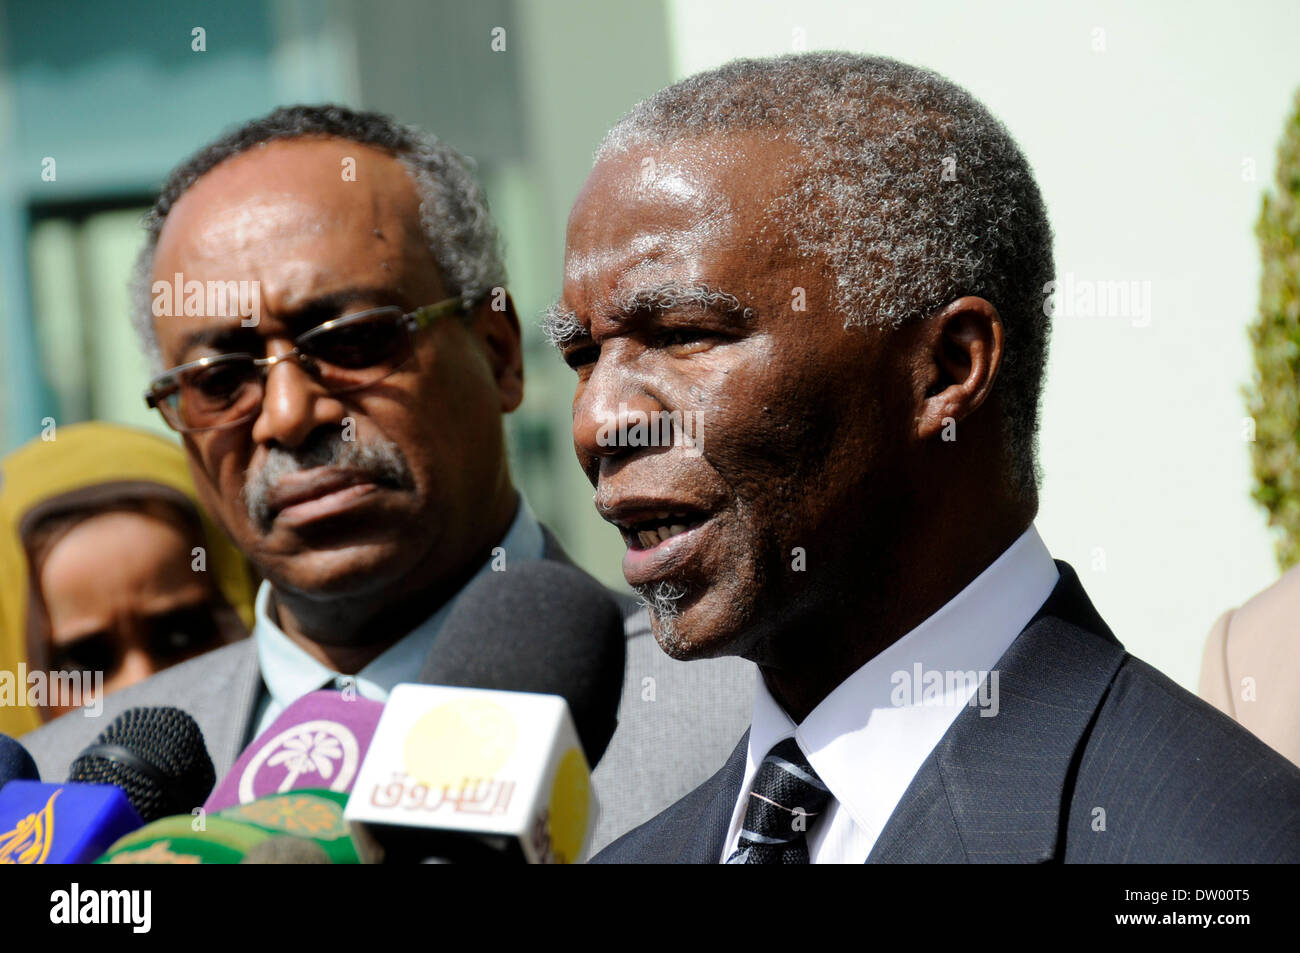 Khartoum, Sudan. 25th Feb, 2014. Thabo Mbeki (R), the head of the African Union high-ranking panel on Sudan and former South African president, speaks to media after his meeting with Sudanese President Omar al-Bashir, in Khartoum, Sudan, on Feb. 25, 2014. © Mohammed Babiker/Xinhua/Alamy Live News Stock Photo